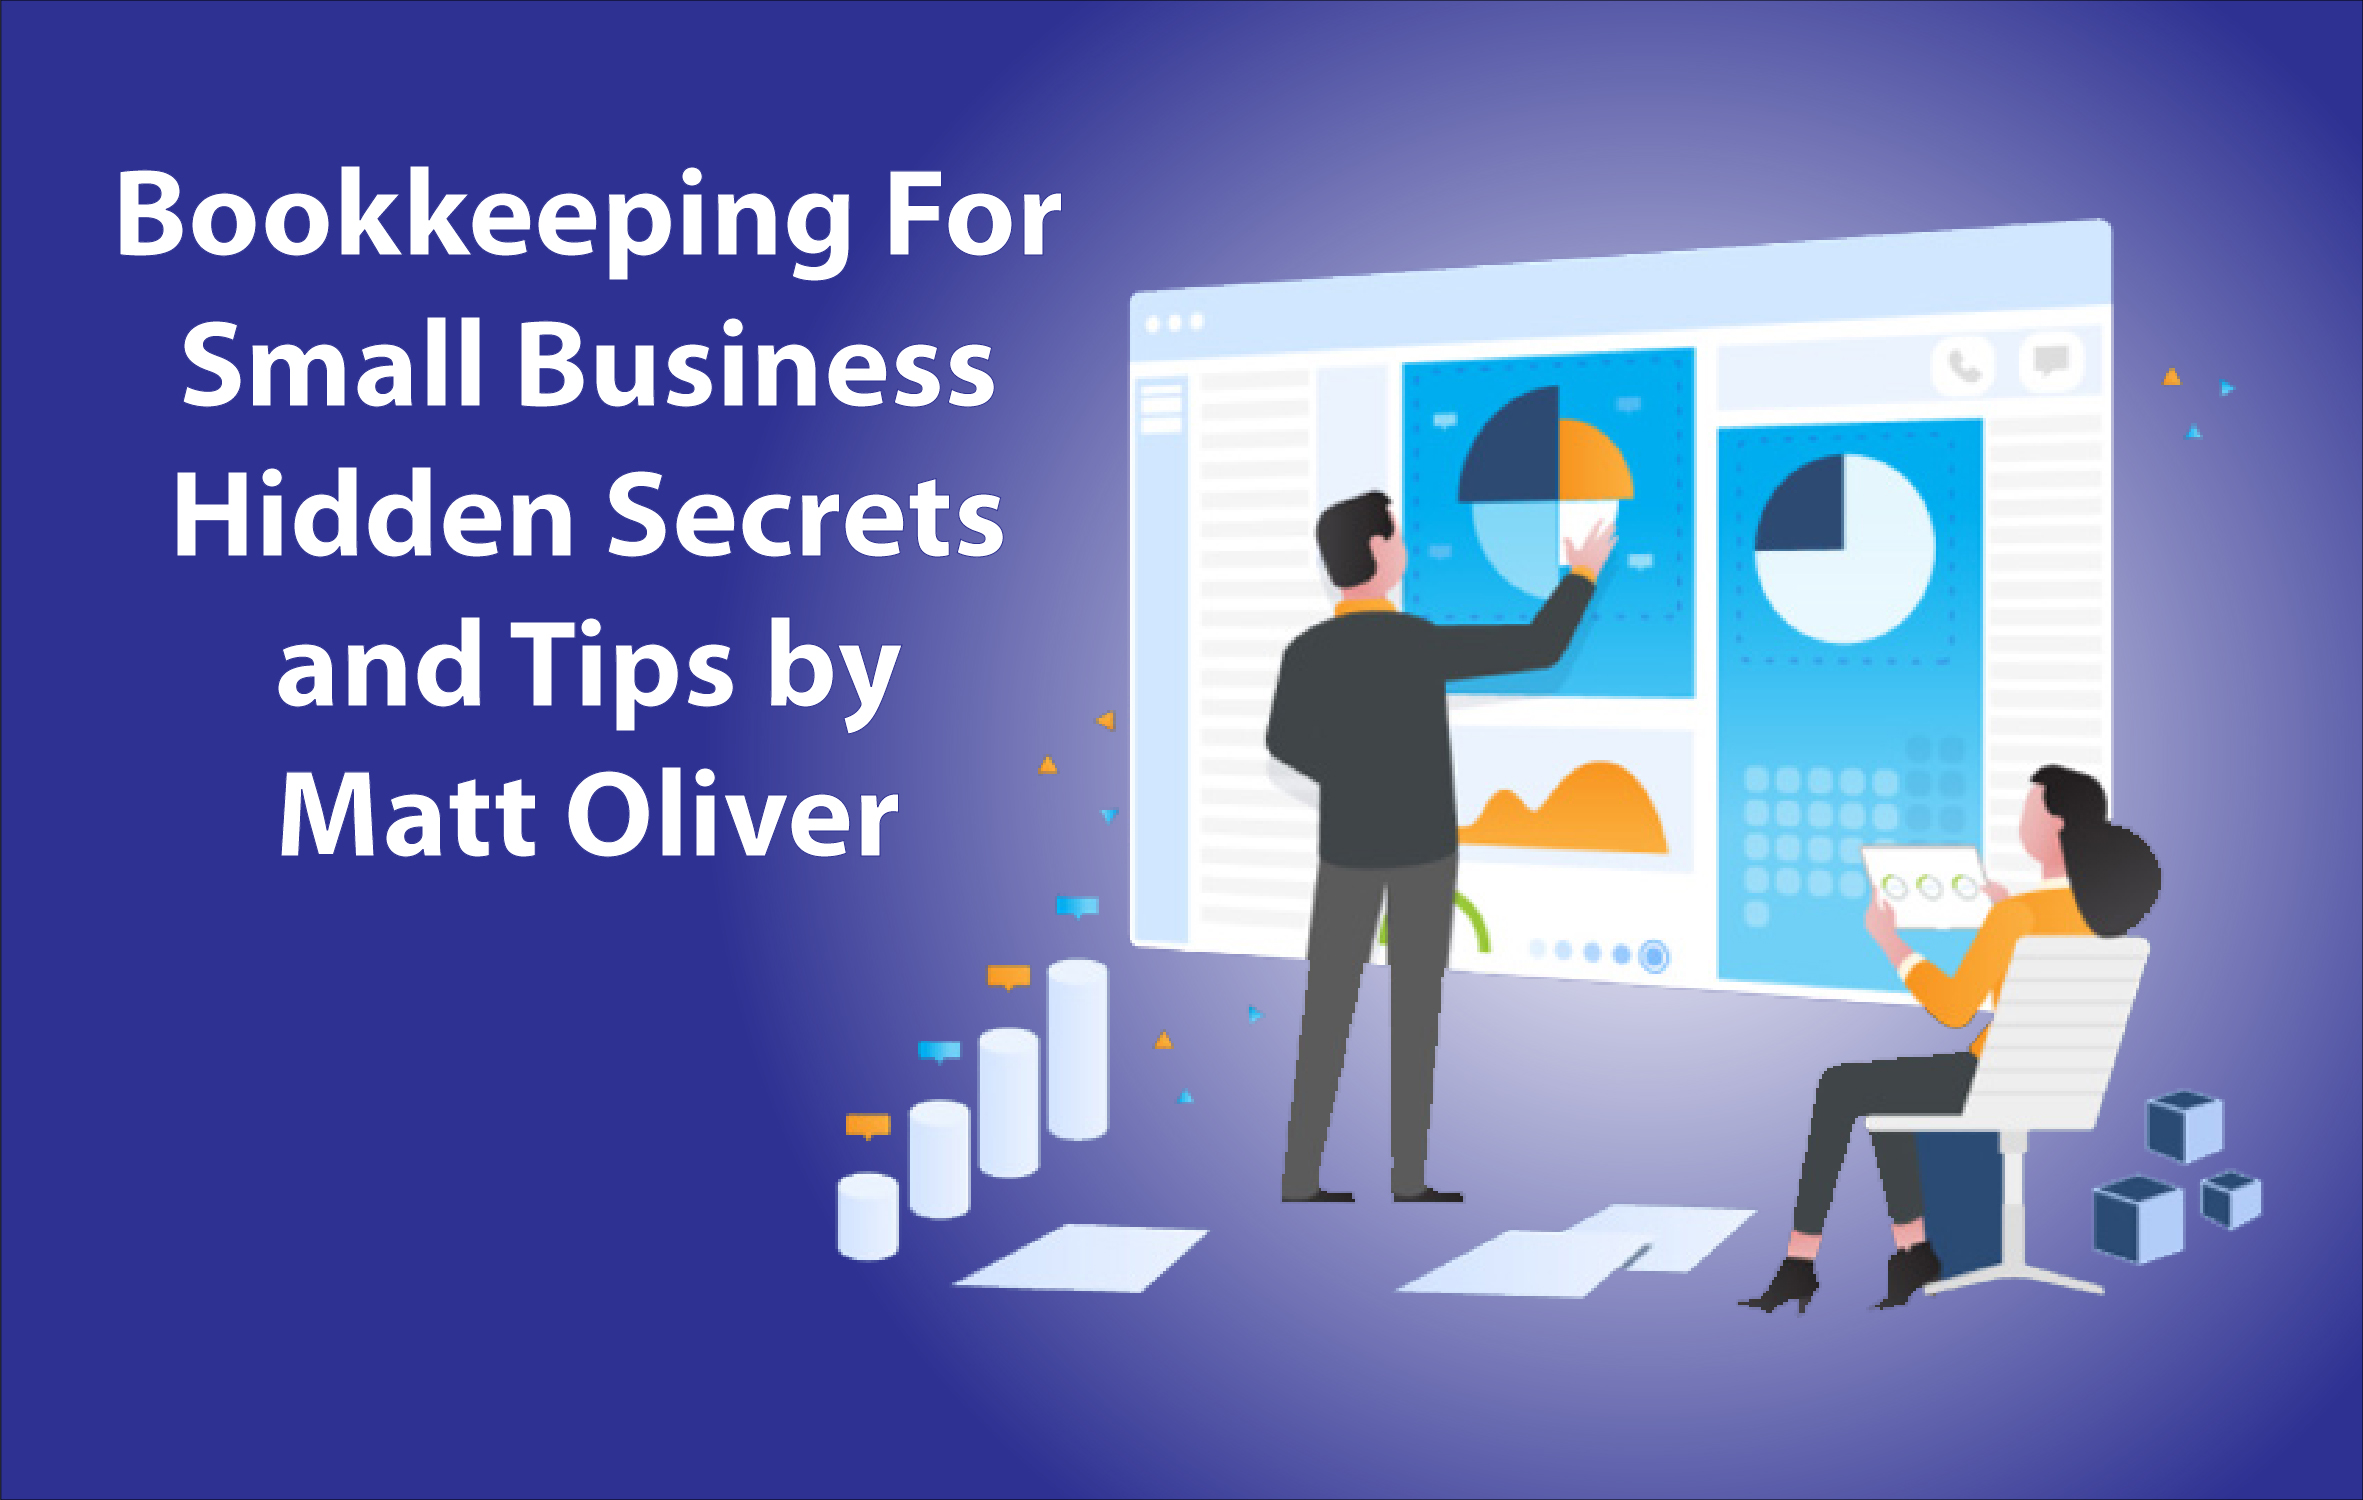 Bookkeeping For Small Business Hidden Secrets and Tips by Matt Oliver